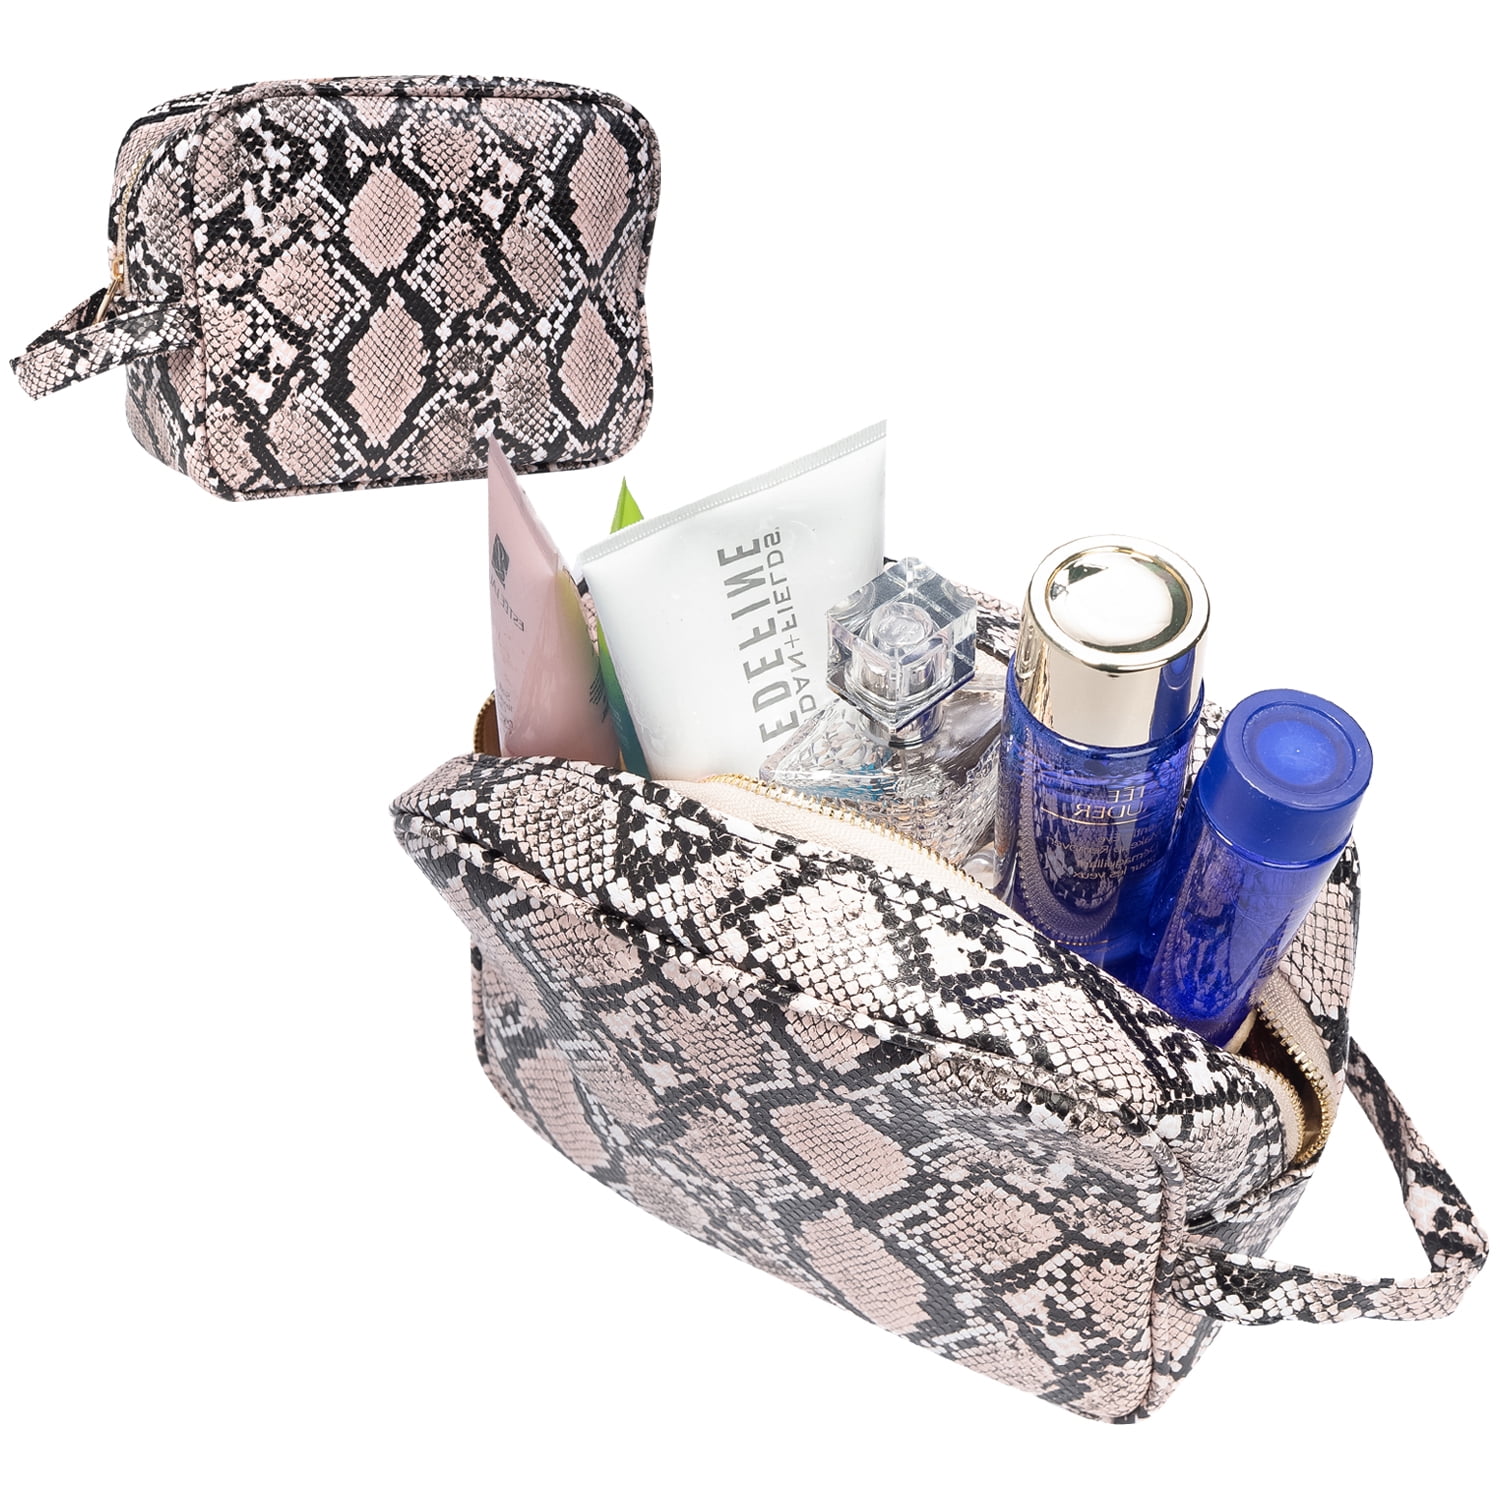 Luxouria Checkered Makeup Bag for Women - Luxury Travel Cosmetic Bags -  Leather Toiletry Pouch 